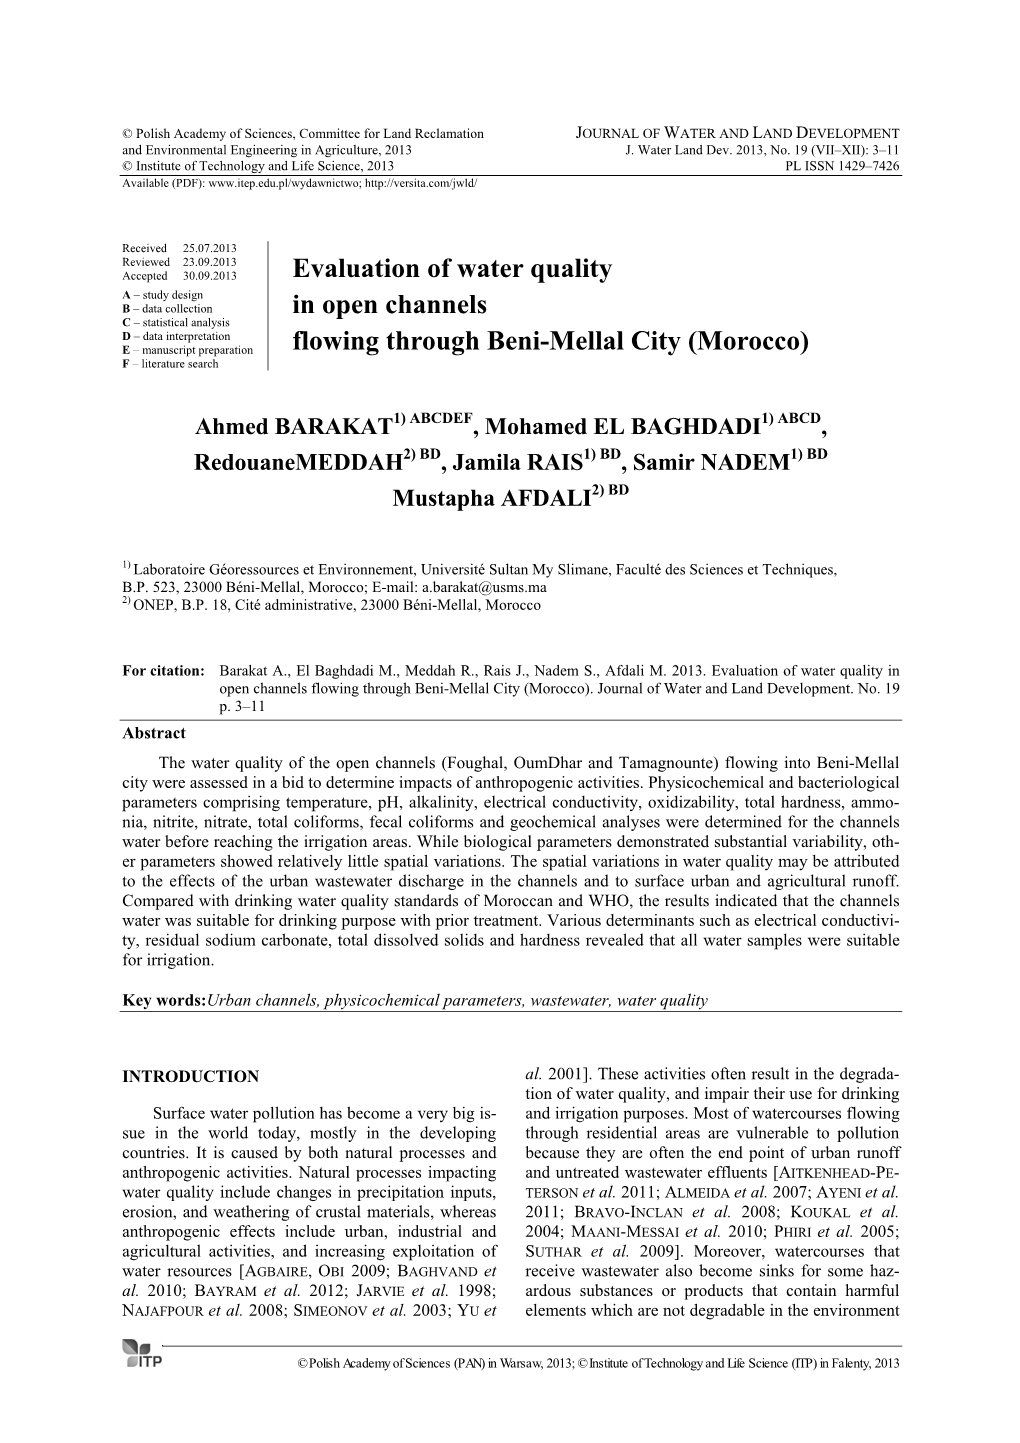 Evaluation of Water Quality in Open Channels Flowing Through Beni-Mellal City (Morocco)